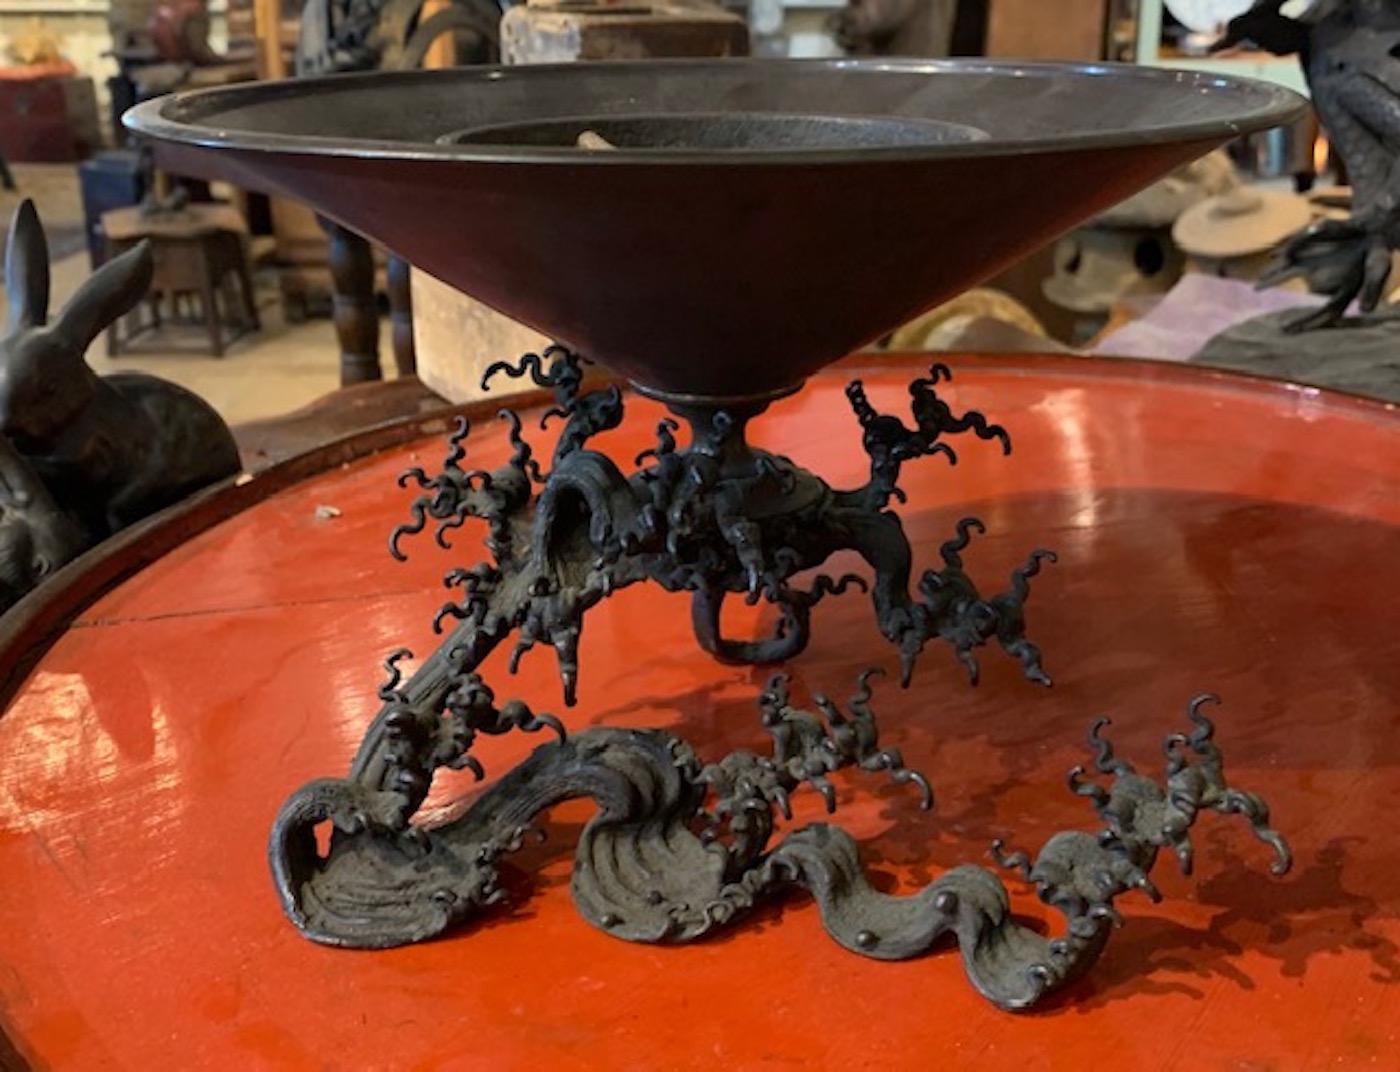 A bronze base in the form of a wave -gracefully lifts this elegant two-piece Taisho usubata. Used for ikebana flower displays, these usubata are highly regarded by the Ikenobo, the oldest and largest school of ikebana in Japan.